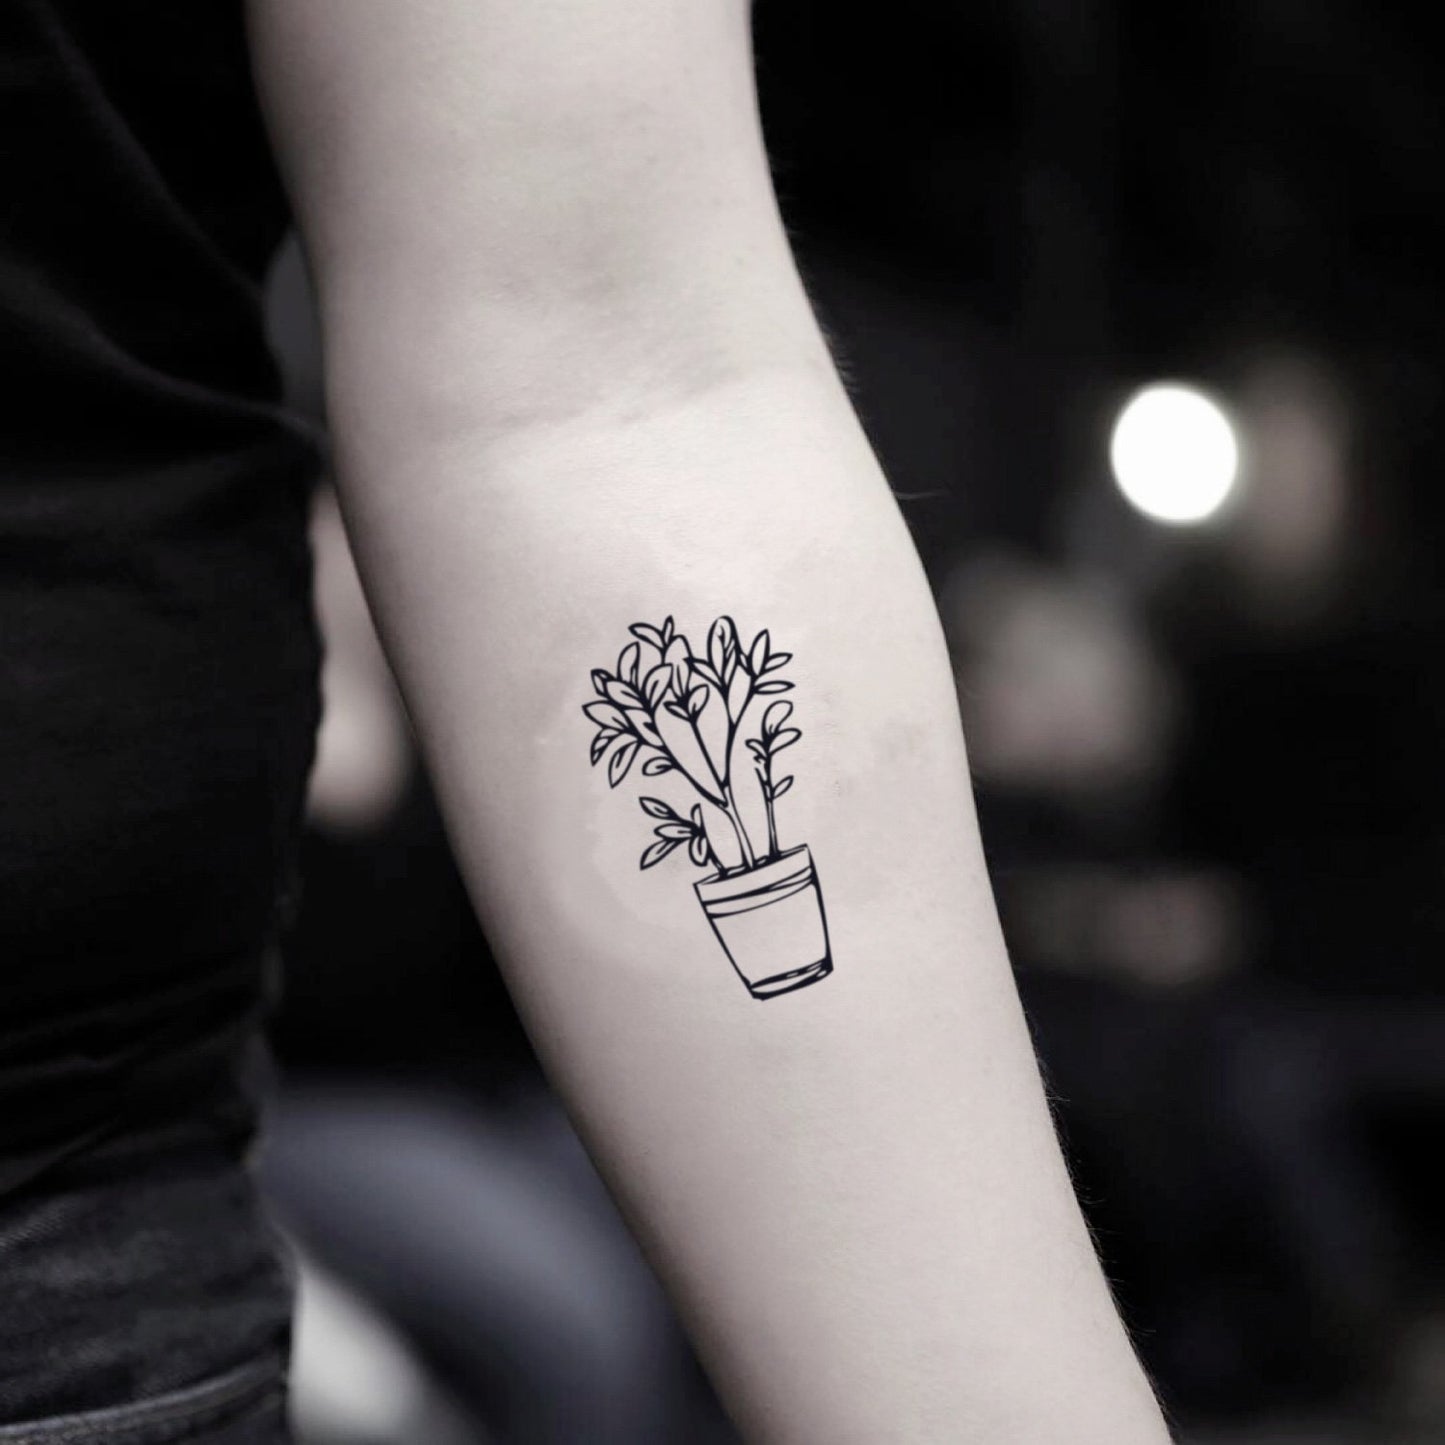 fake small potted plant flower pot nature temporary tattoo sticker design idea on inner arm